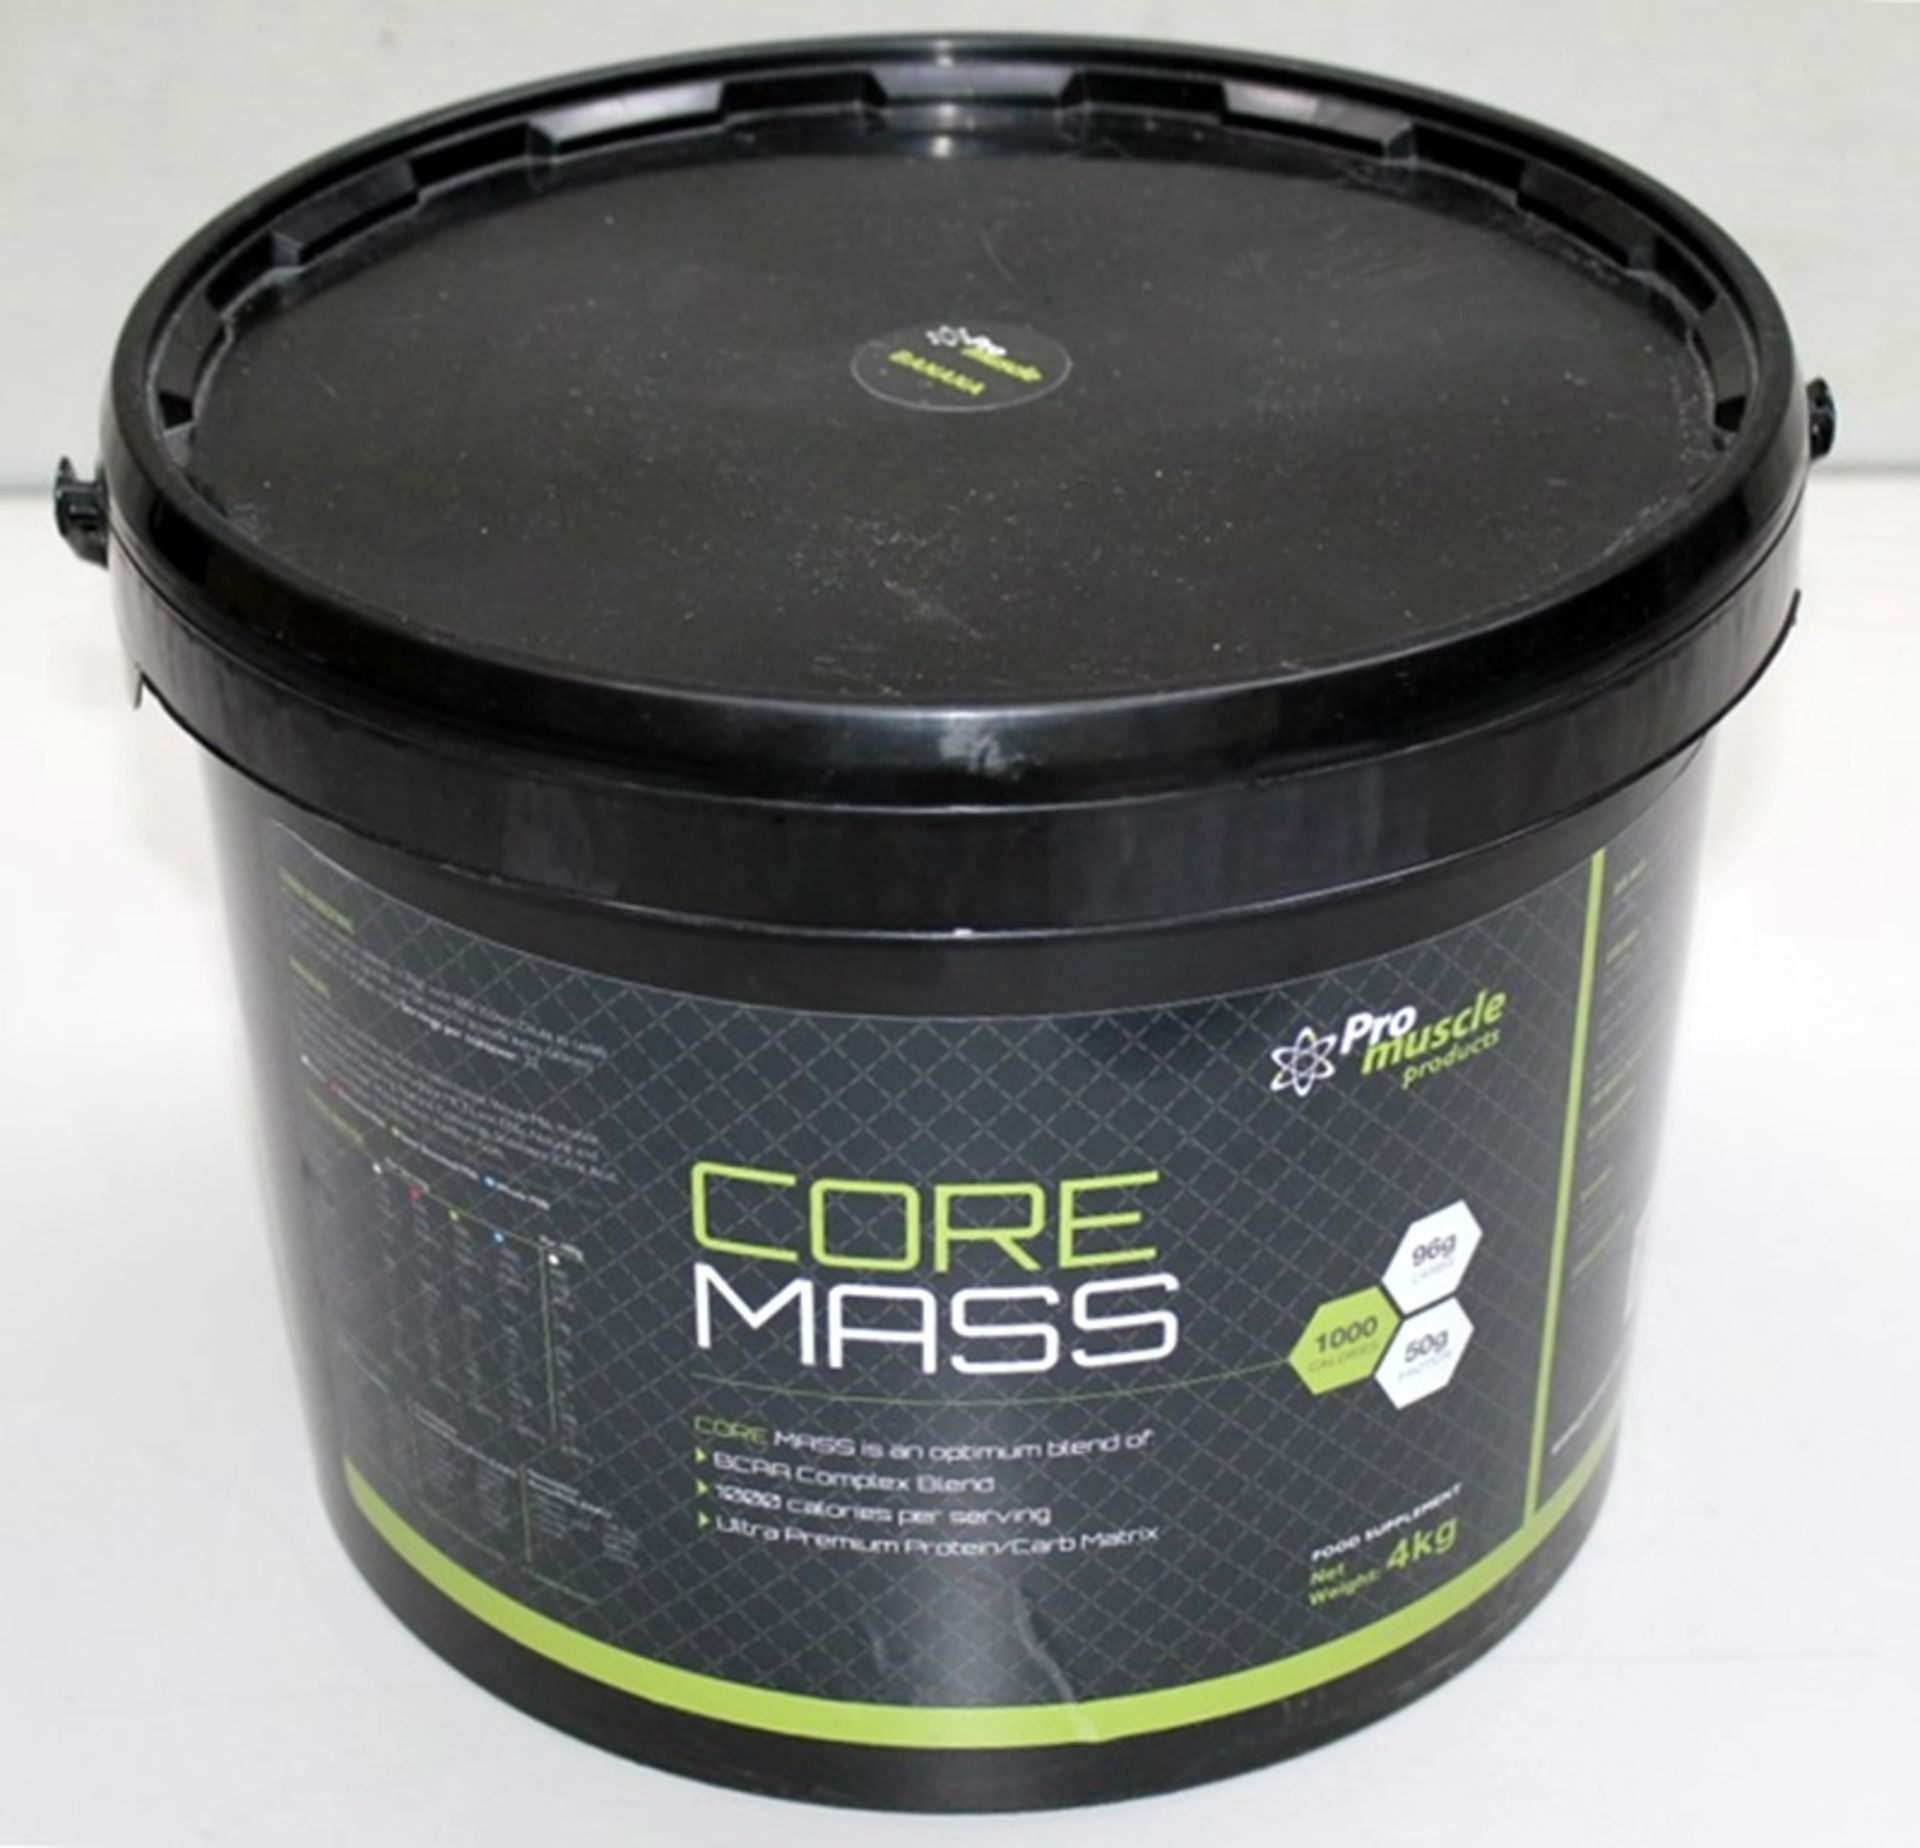 1 x Pro Muscle CORE MASS GAINER Food Supplement (4KG) - Flavour: BANANA - New Sealed Stock - Best - Image 2 of 4